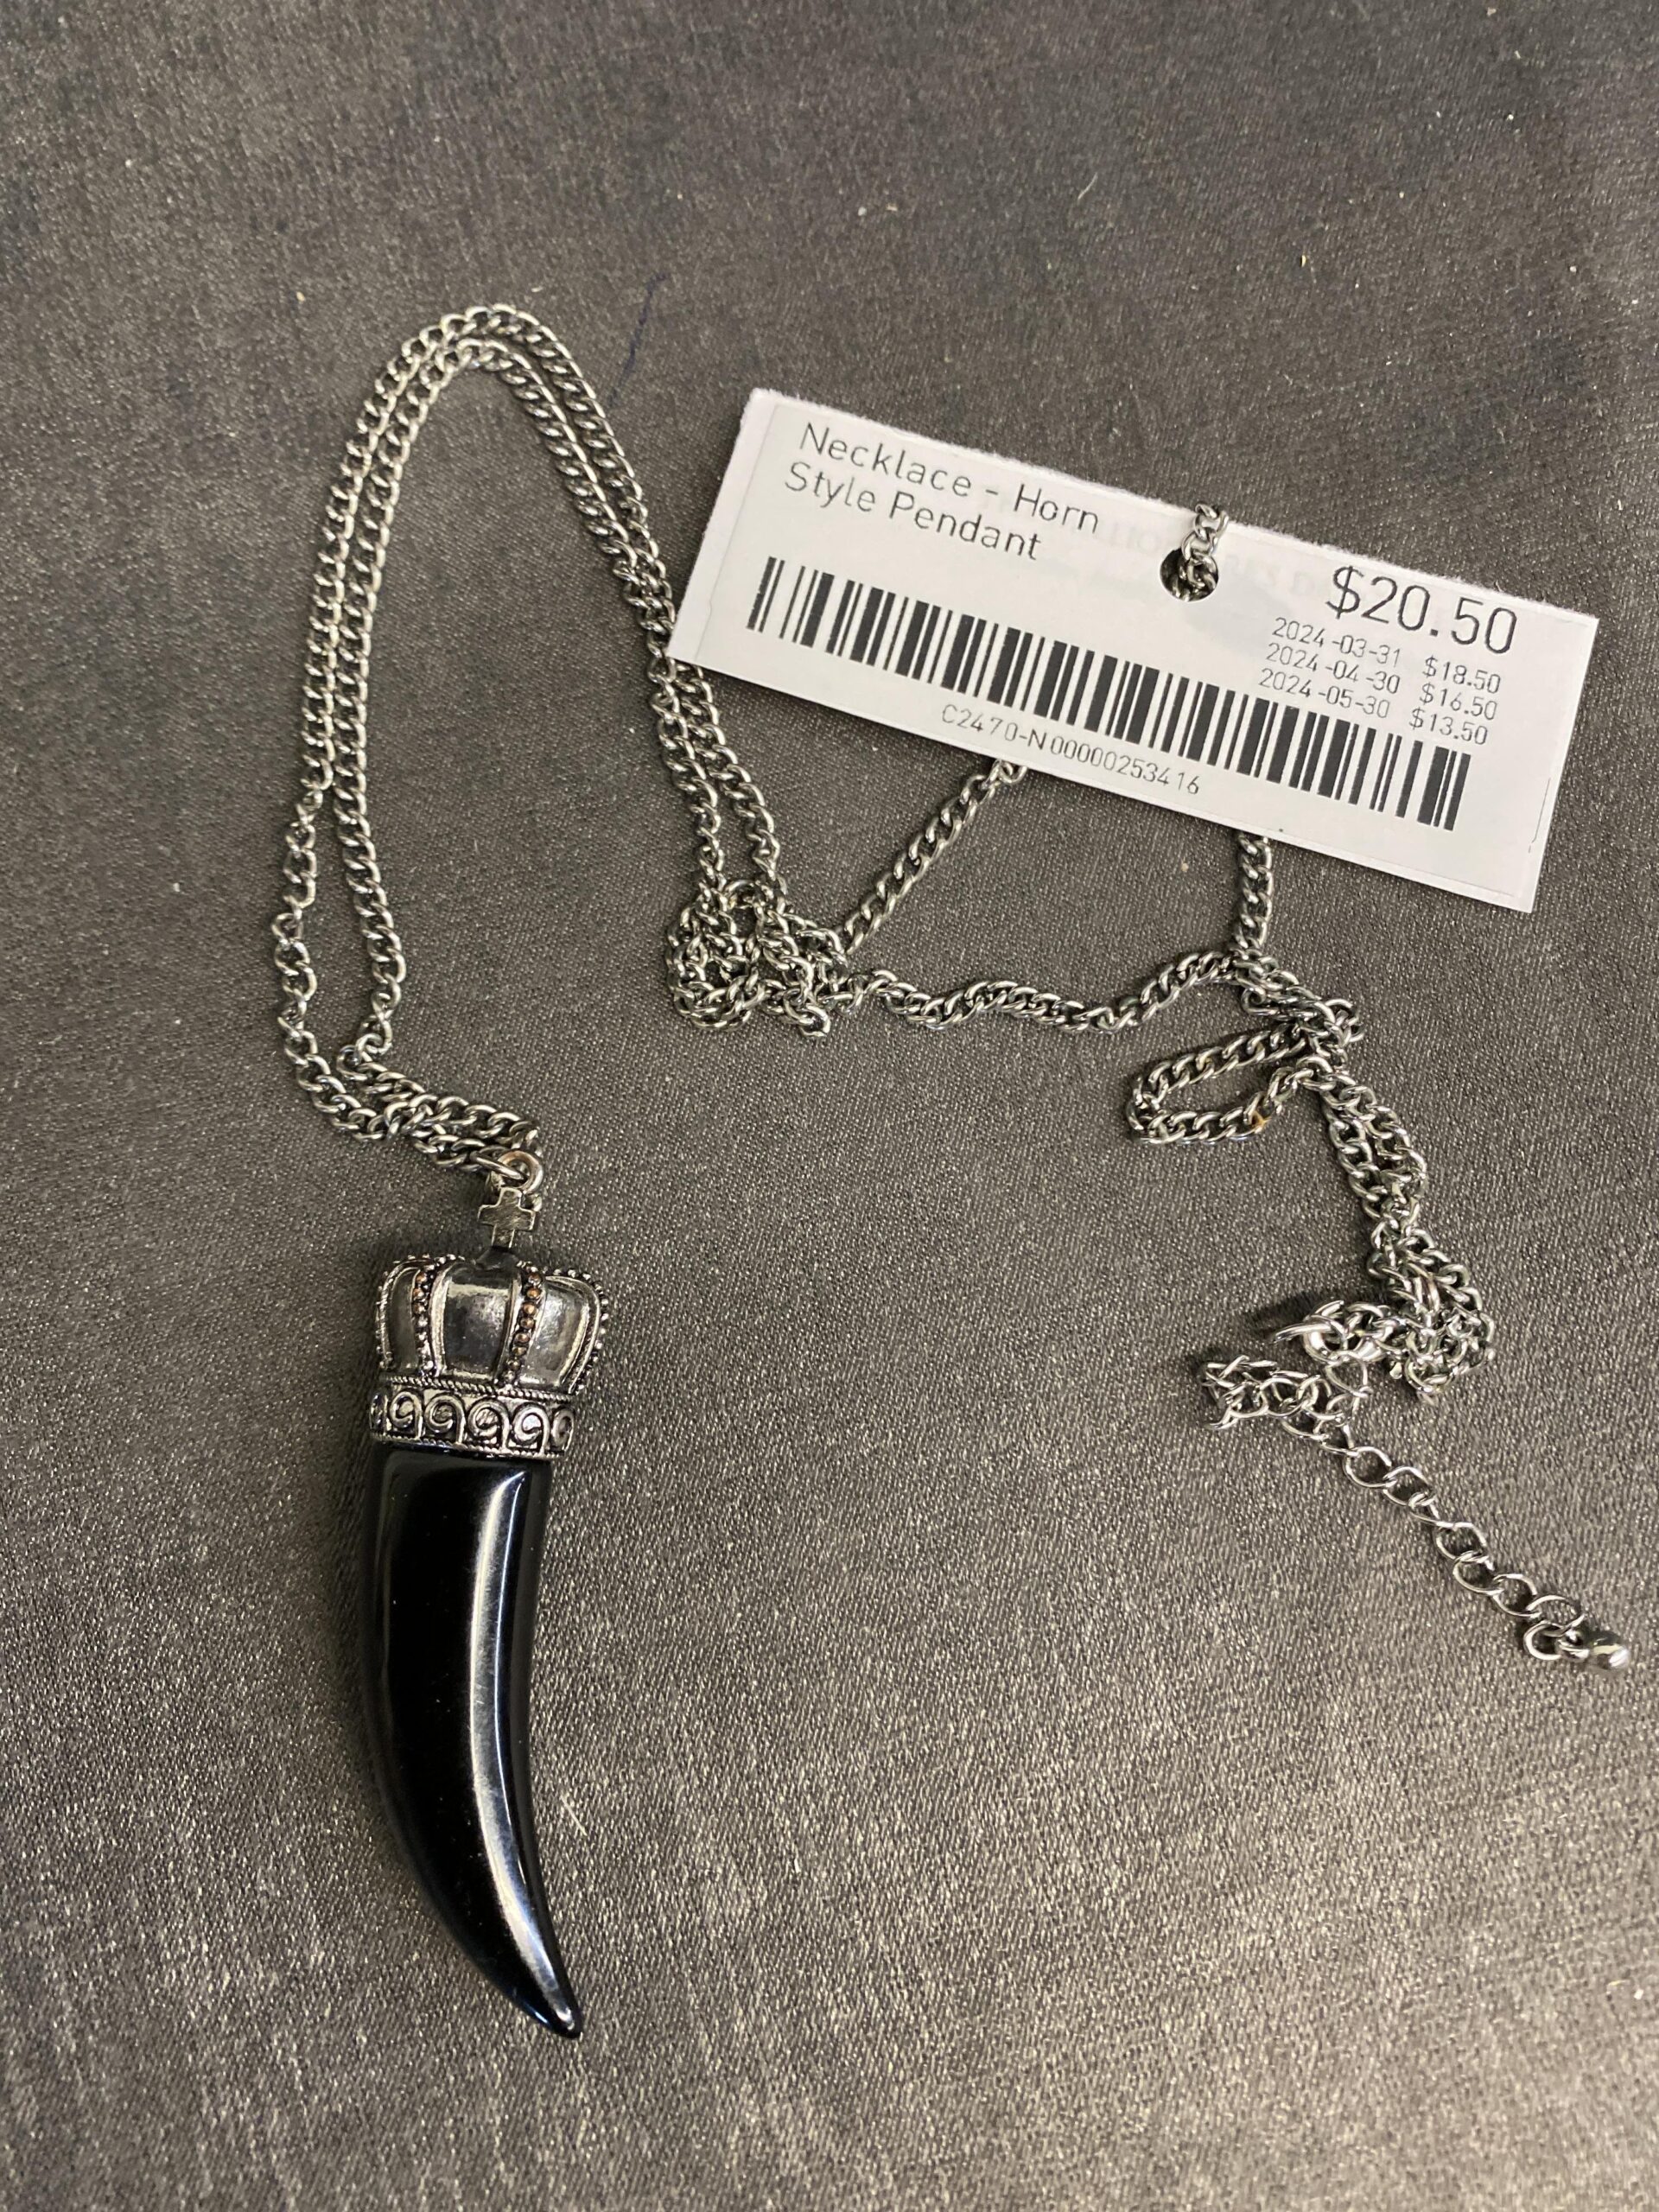 Necklace – Horn Style Pendant